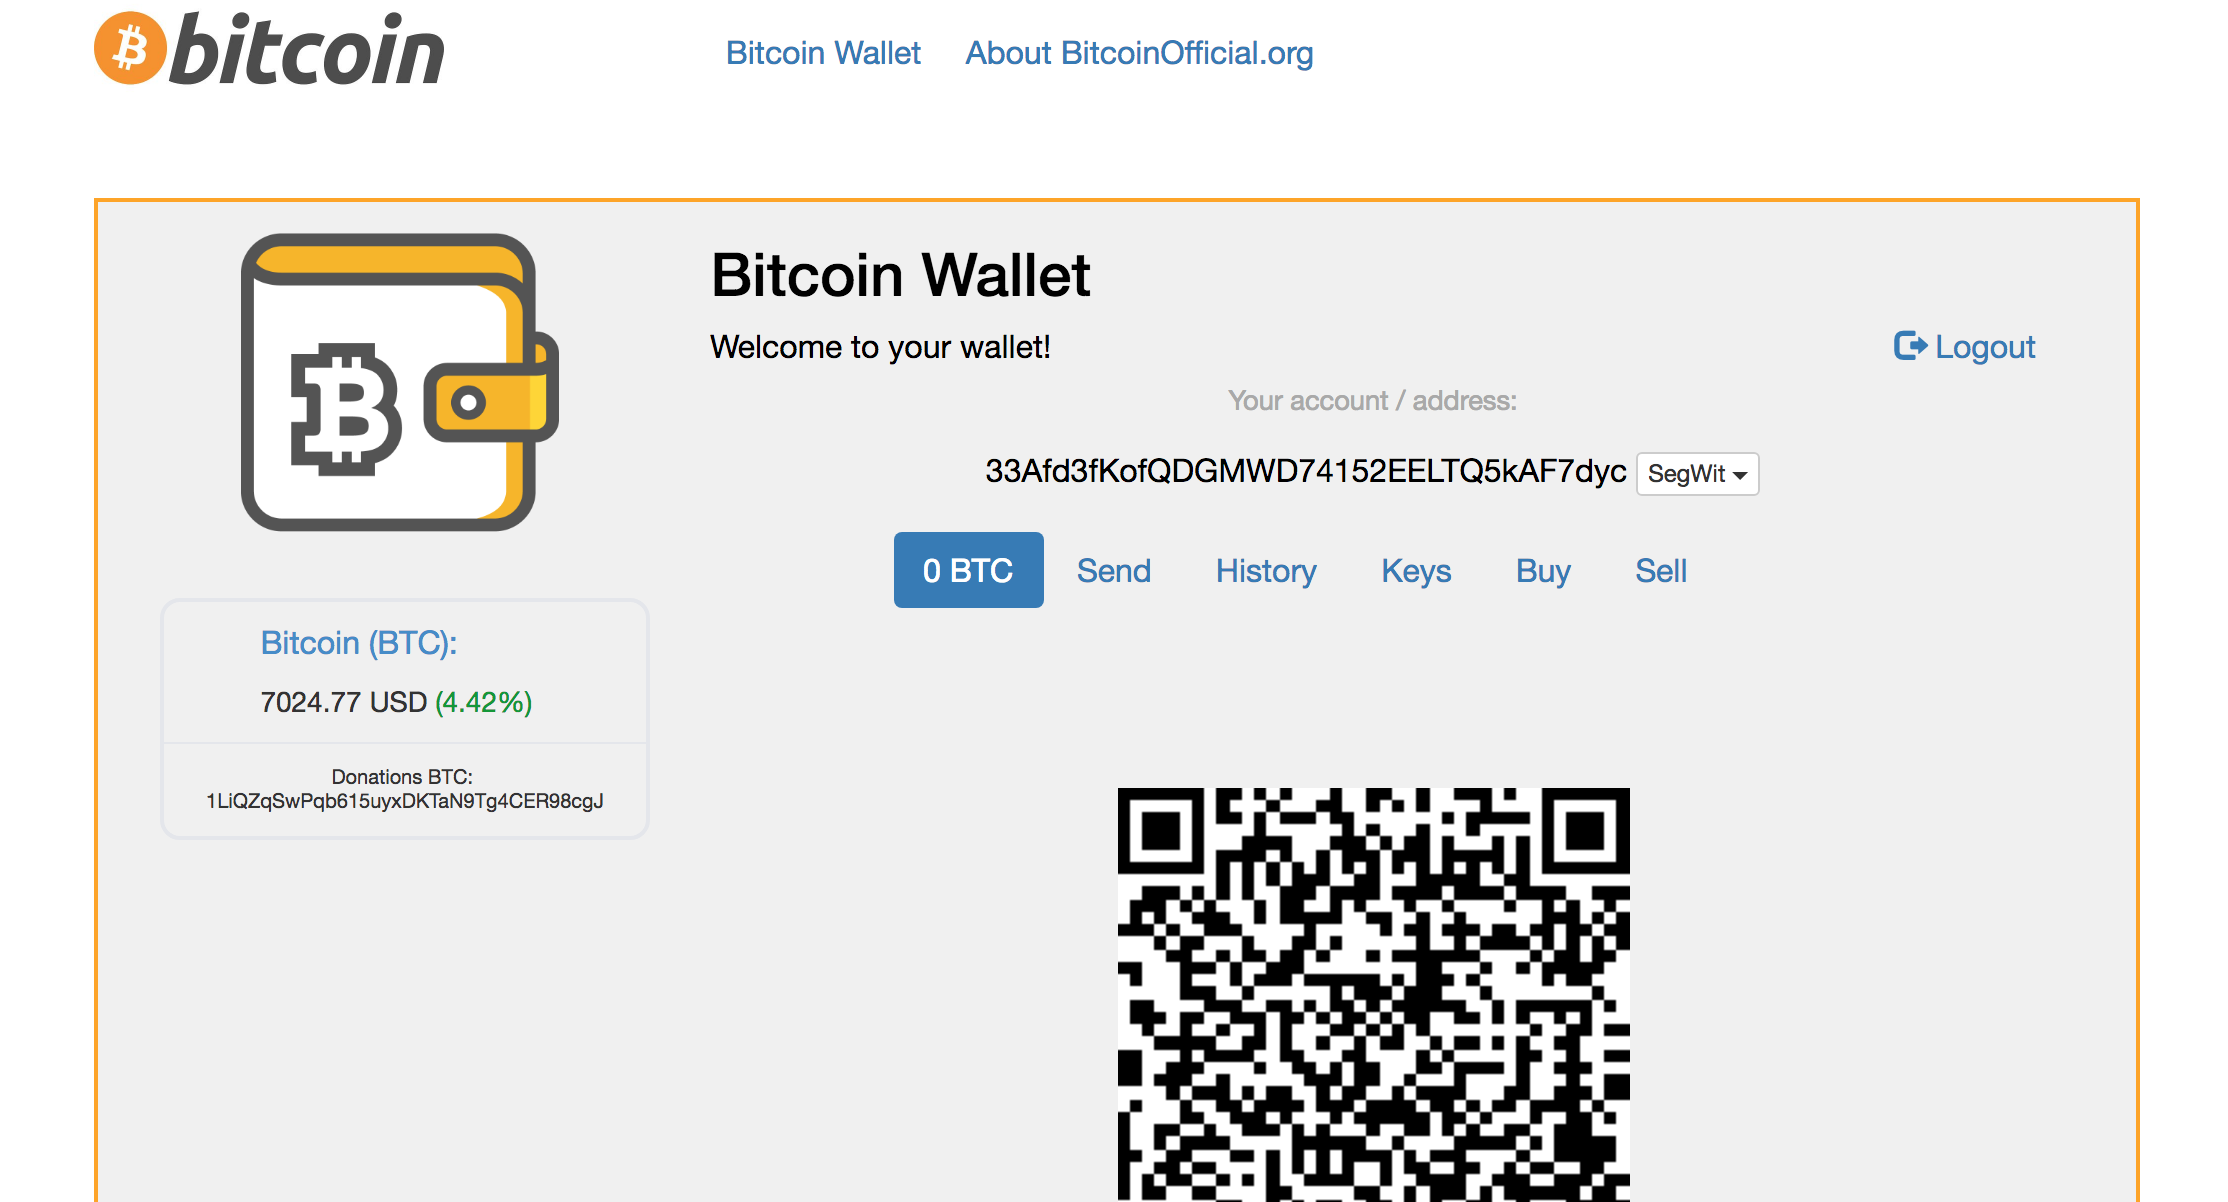 How to Trace Bitcoin Address Owner: 5 Lesser-known Ways